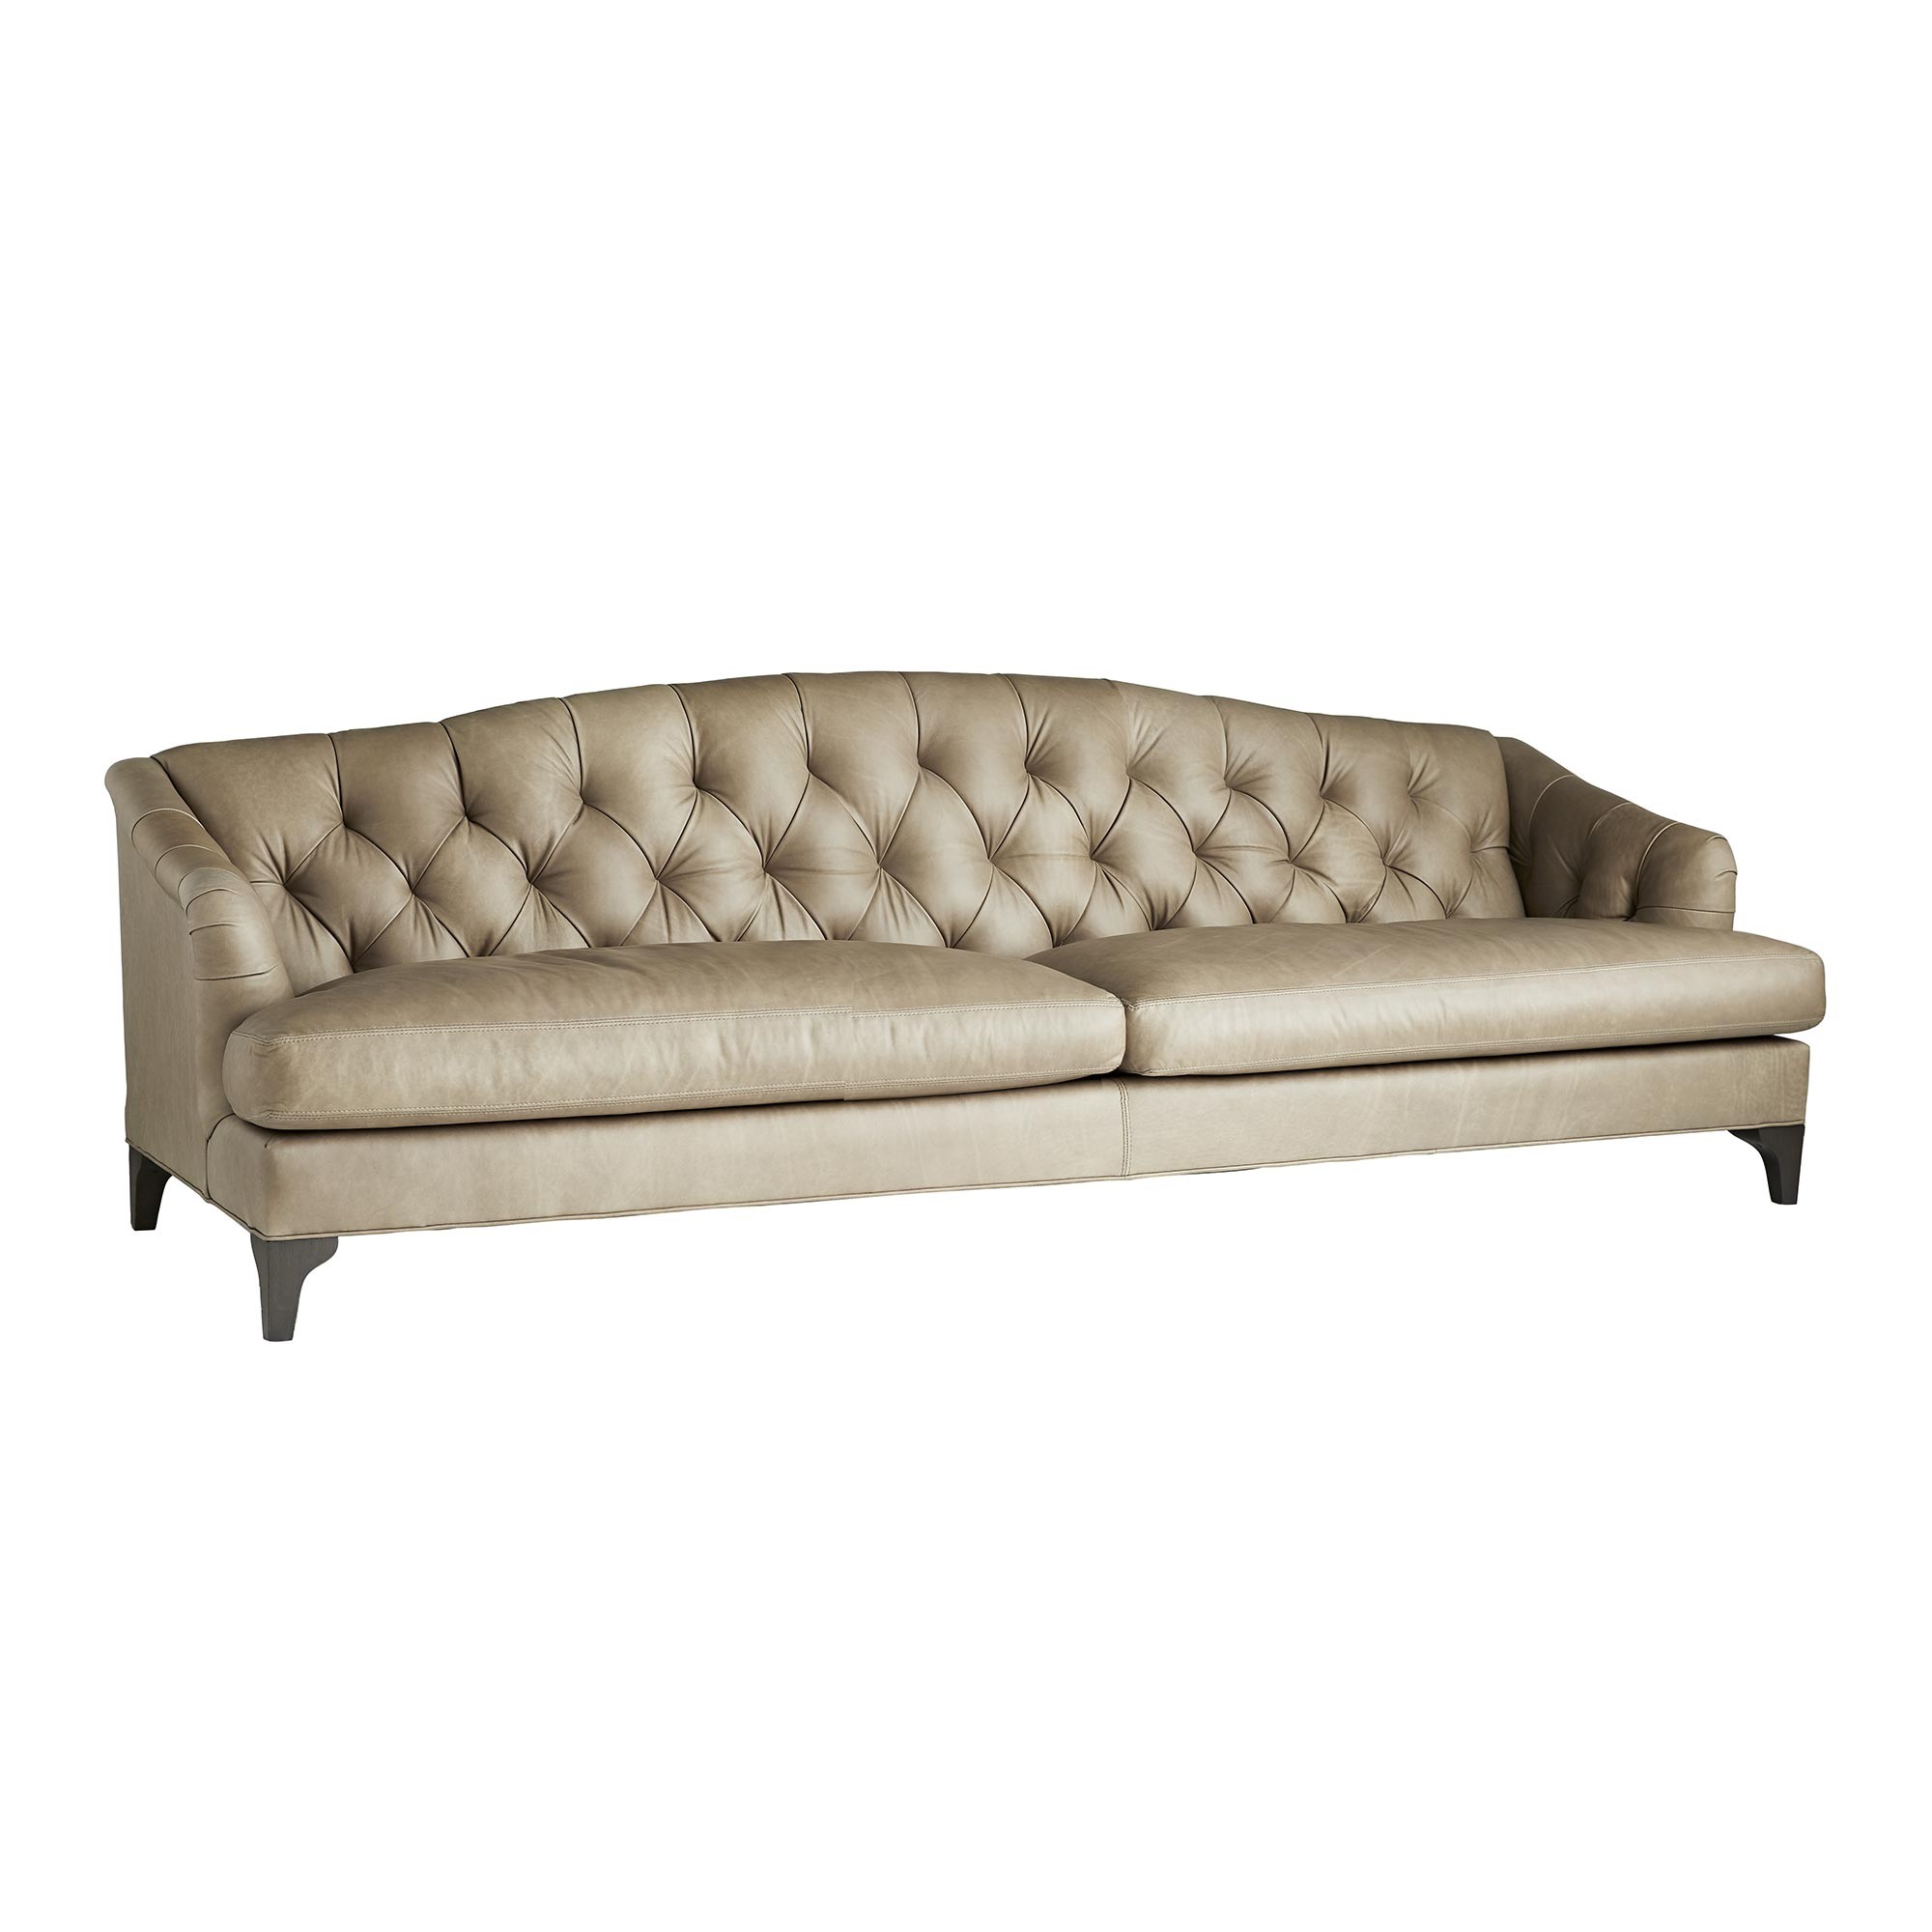 Tufted Leather Sofa Modern Gray, Tufted Leather Furniture